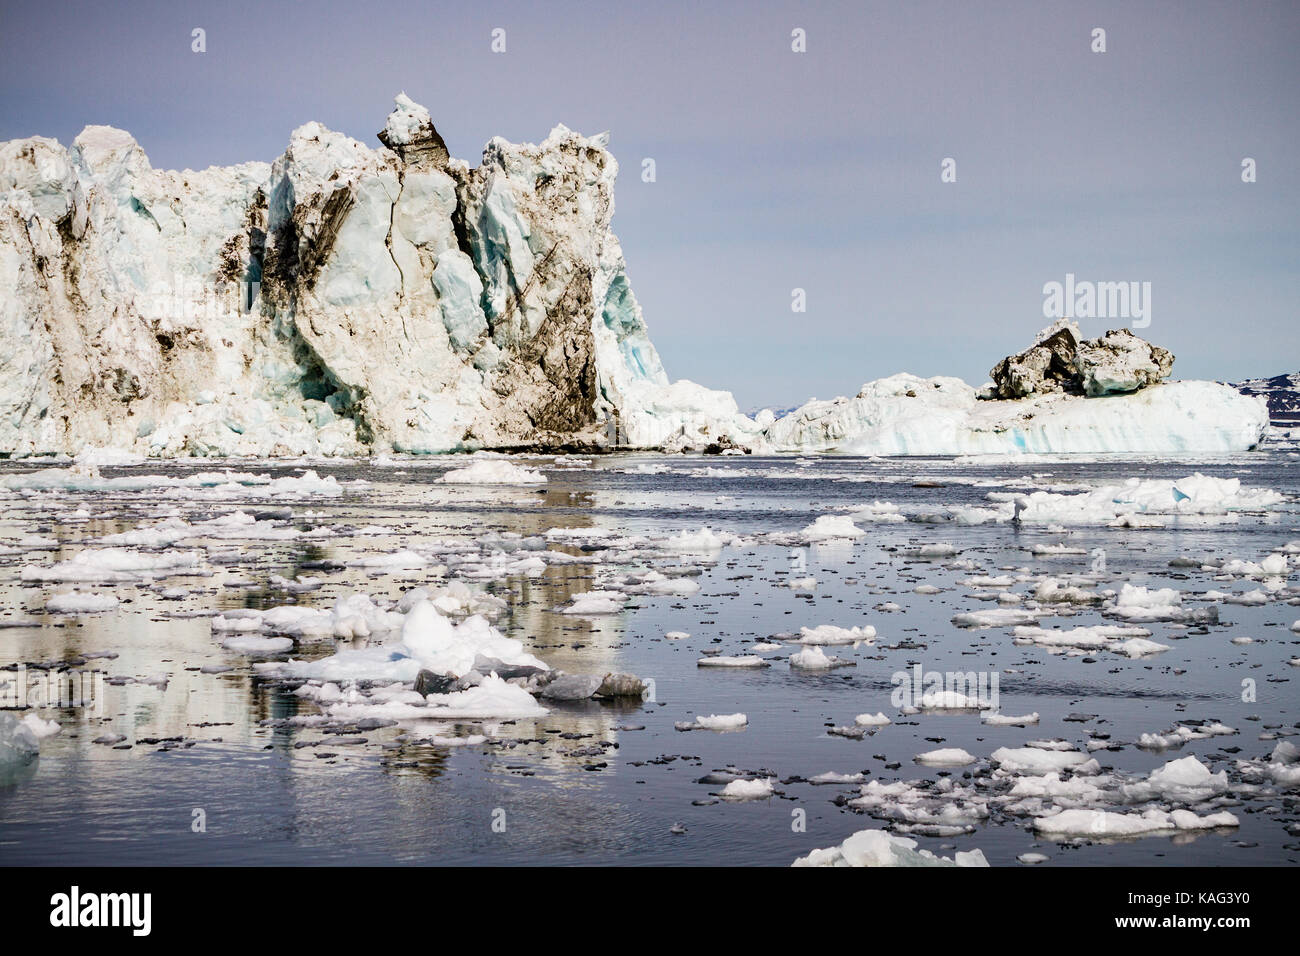 Icebergs in the Ilulissat Ice Fjord off Greenland's west coast. Stock Photo